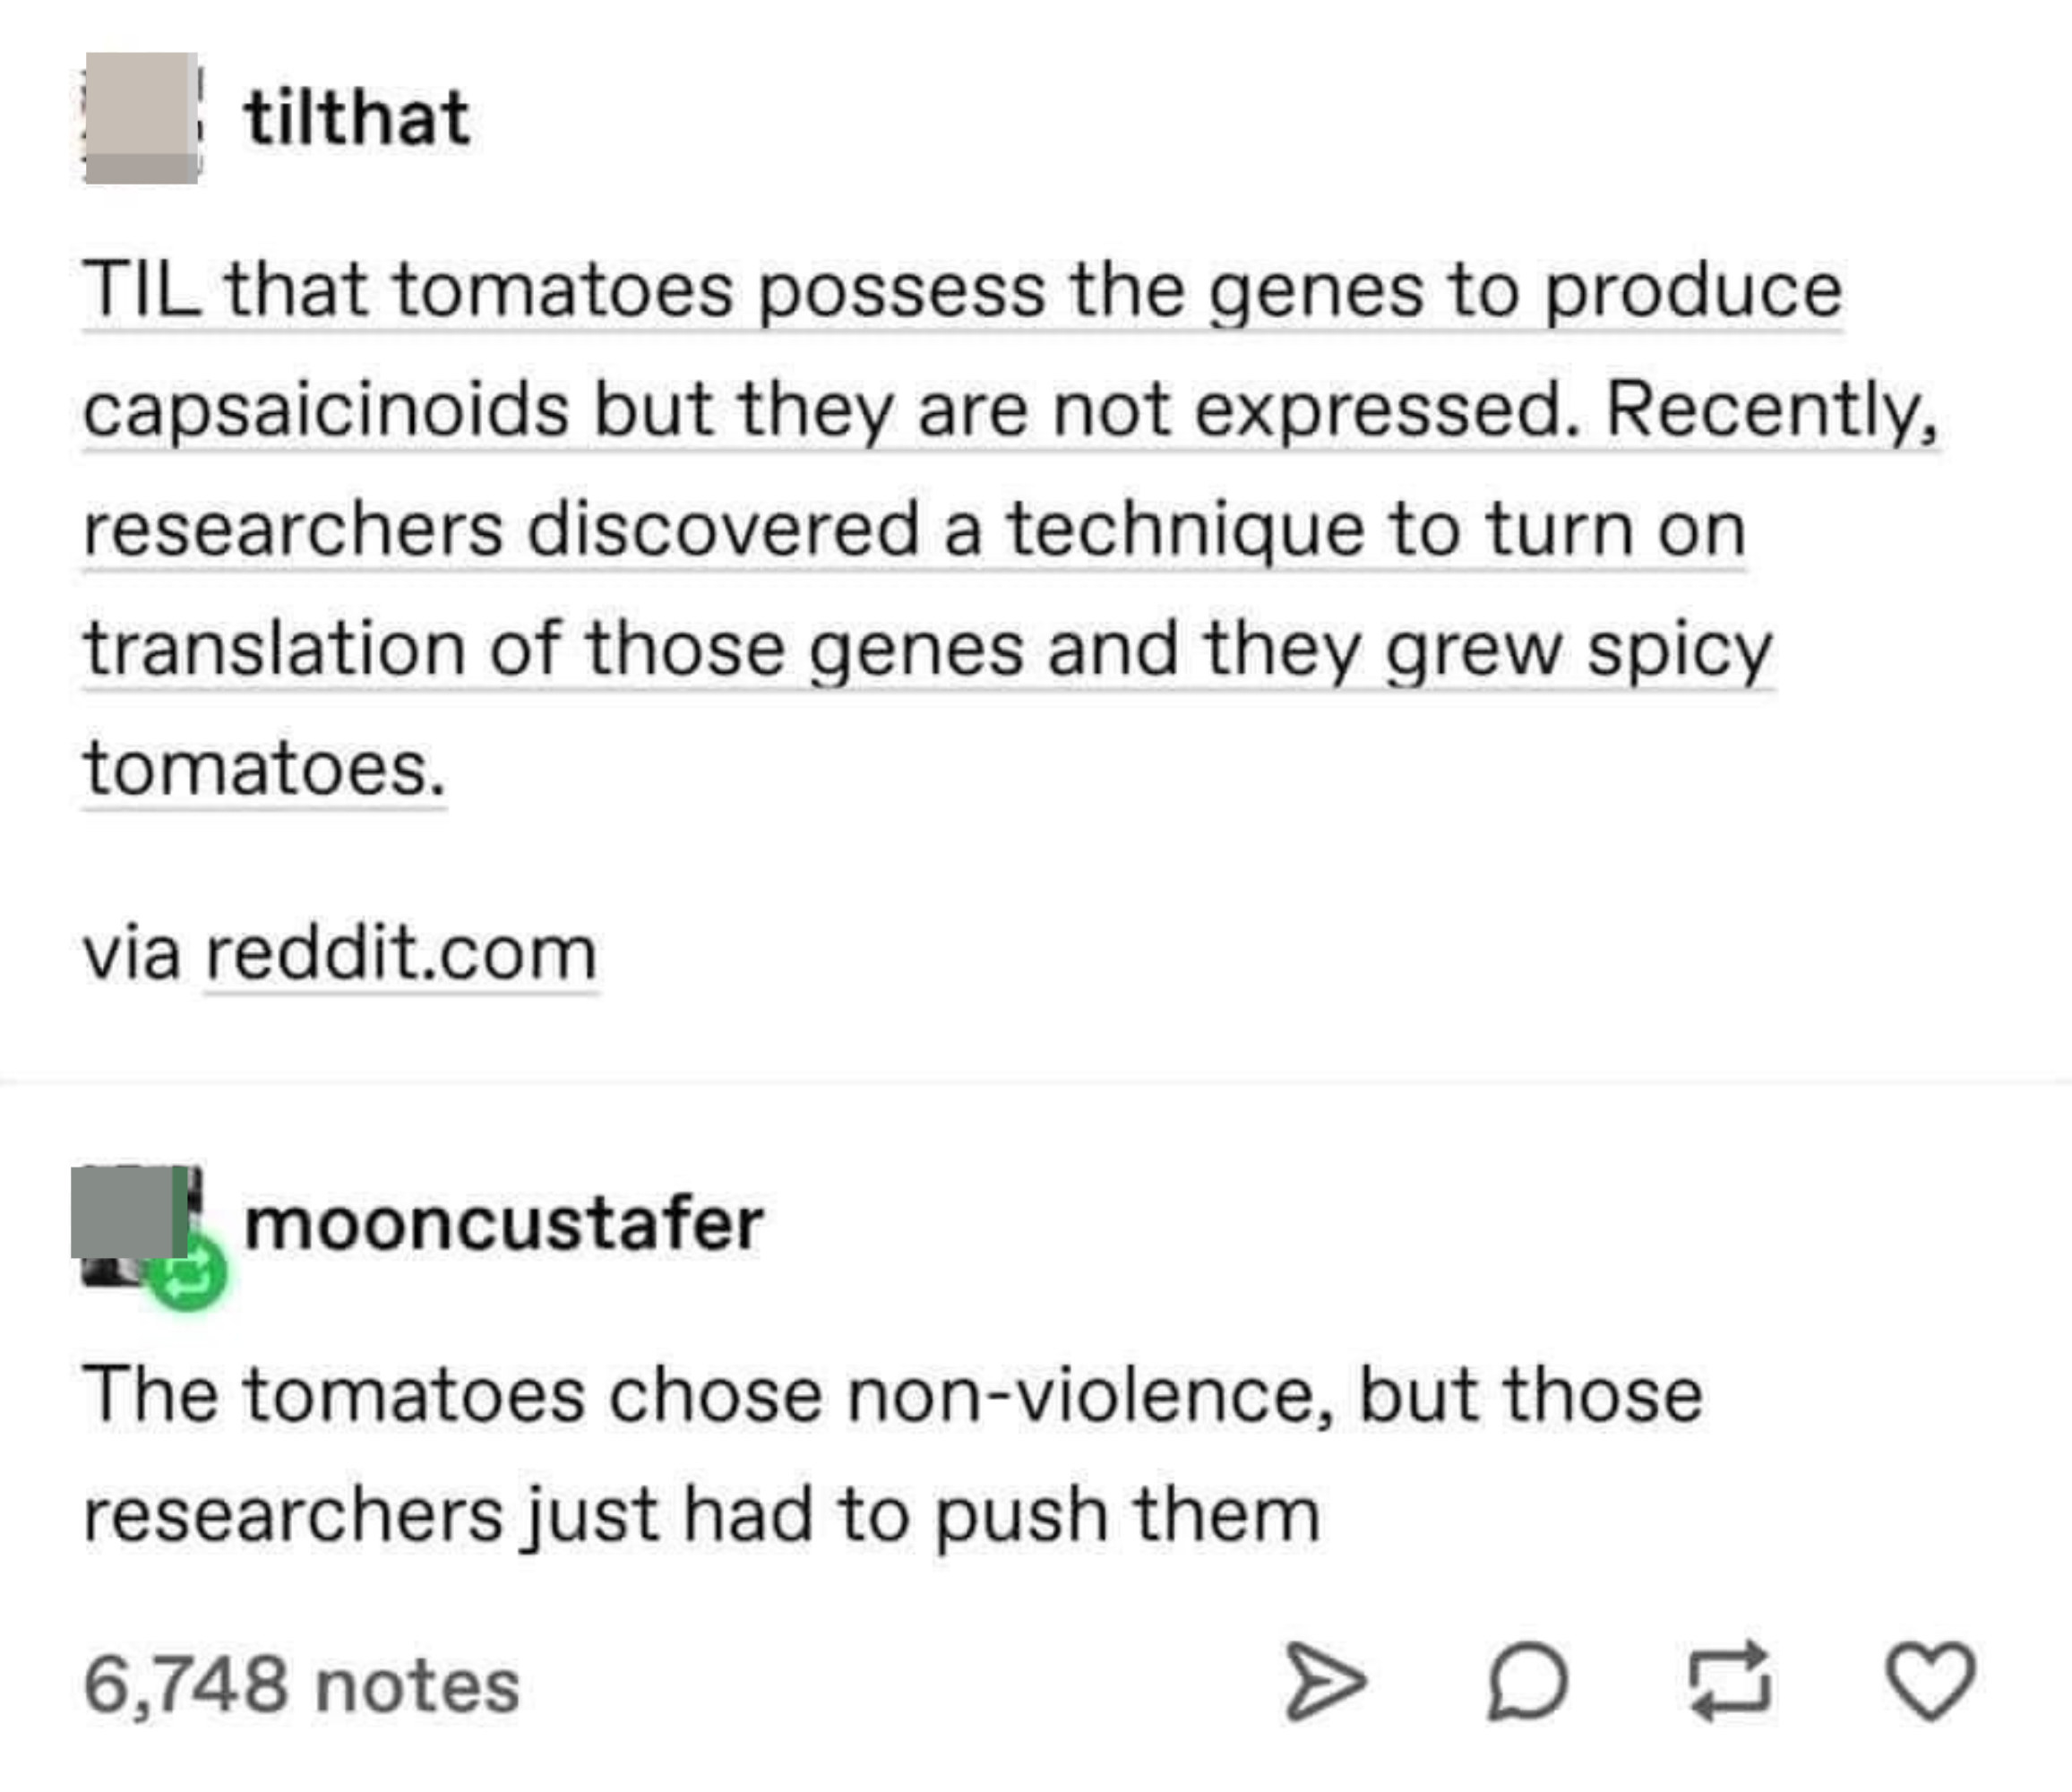 Researchers use a technique to turn on tomato gene to produce capsaicinoids and grow spicy tomatoes, and someone responds that the tomatoes chose nonviolence, but the researchers just had to push them